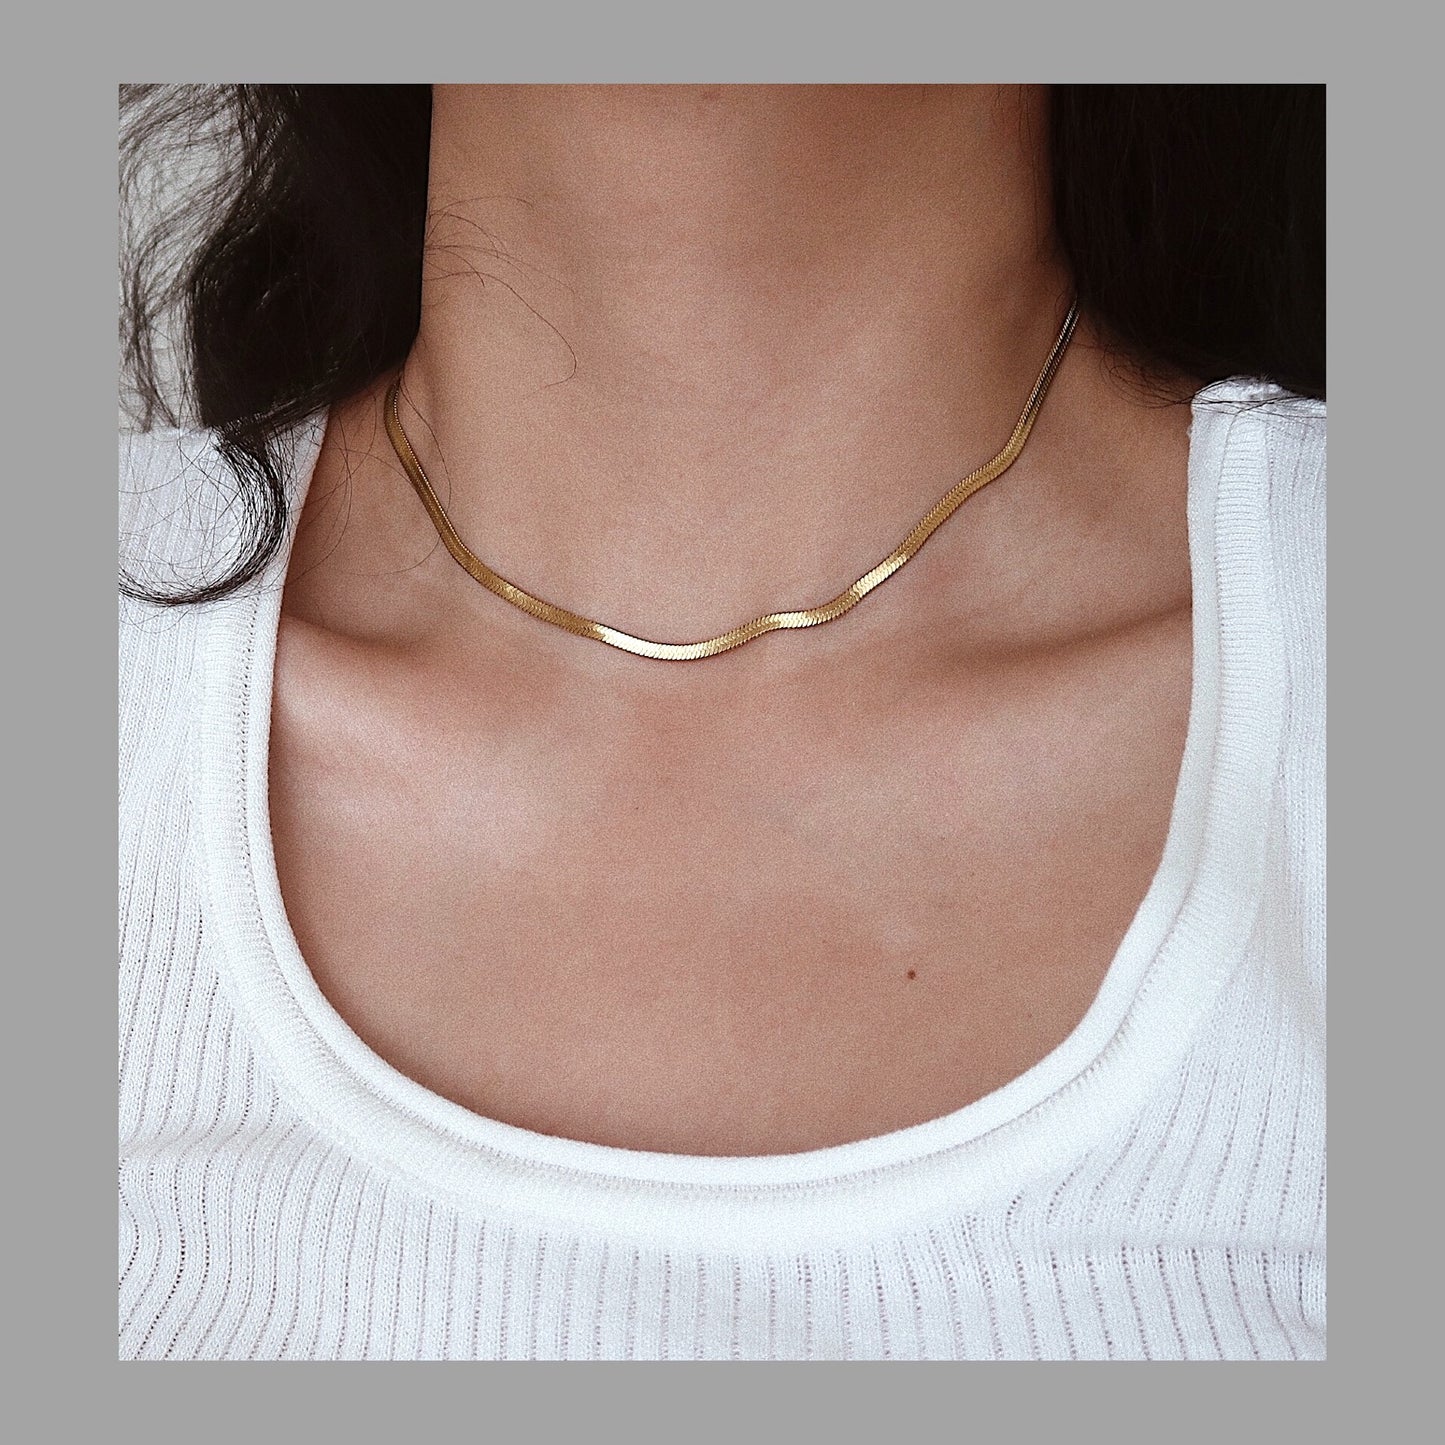 Buy 3mm Round Snake Chain Necklace 14k Solid Yellow Gold Round Snake Chain  Fine Jewelry Unisex Necklace, Mens Gold Chain Online in India - Etsy